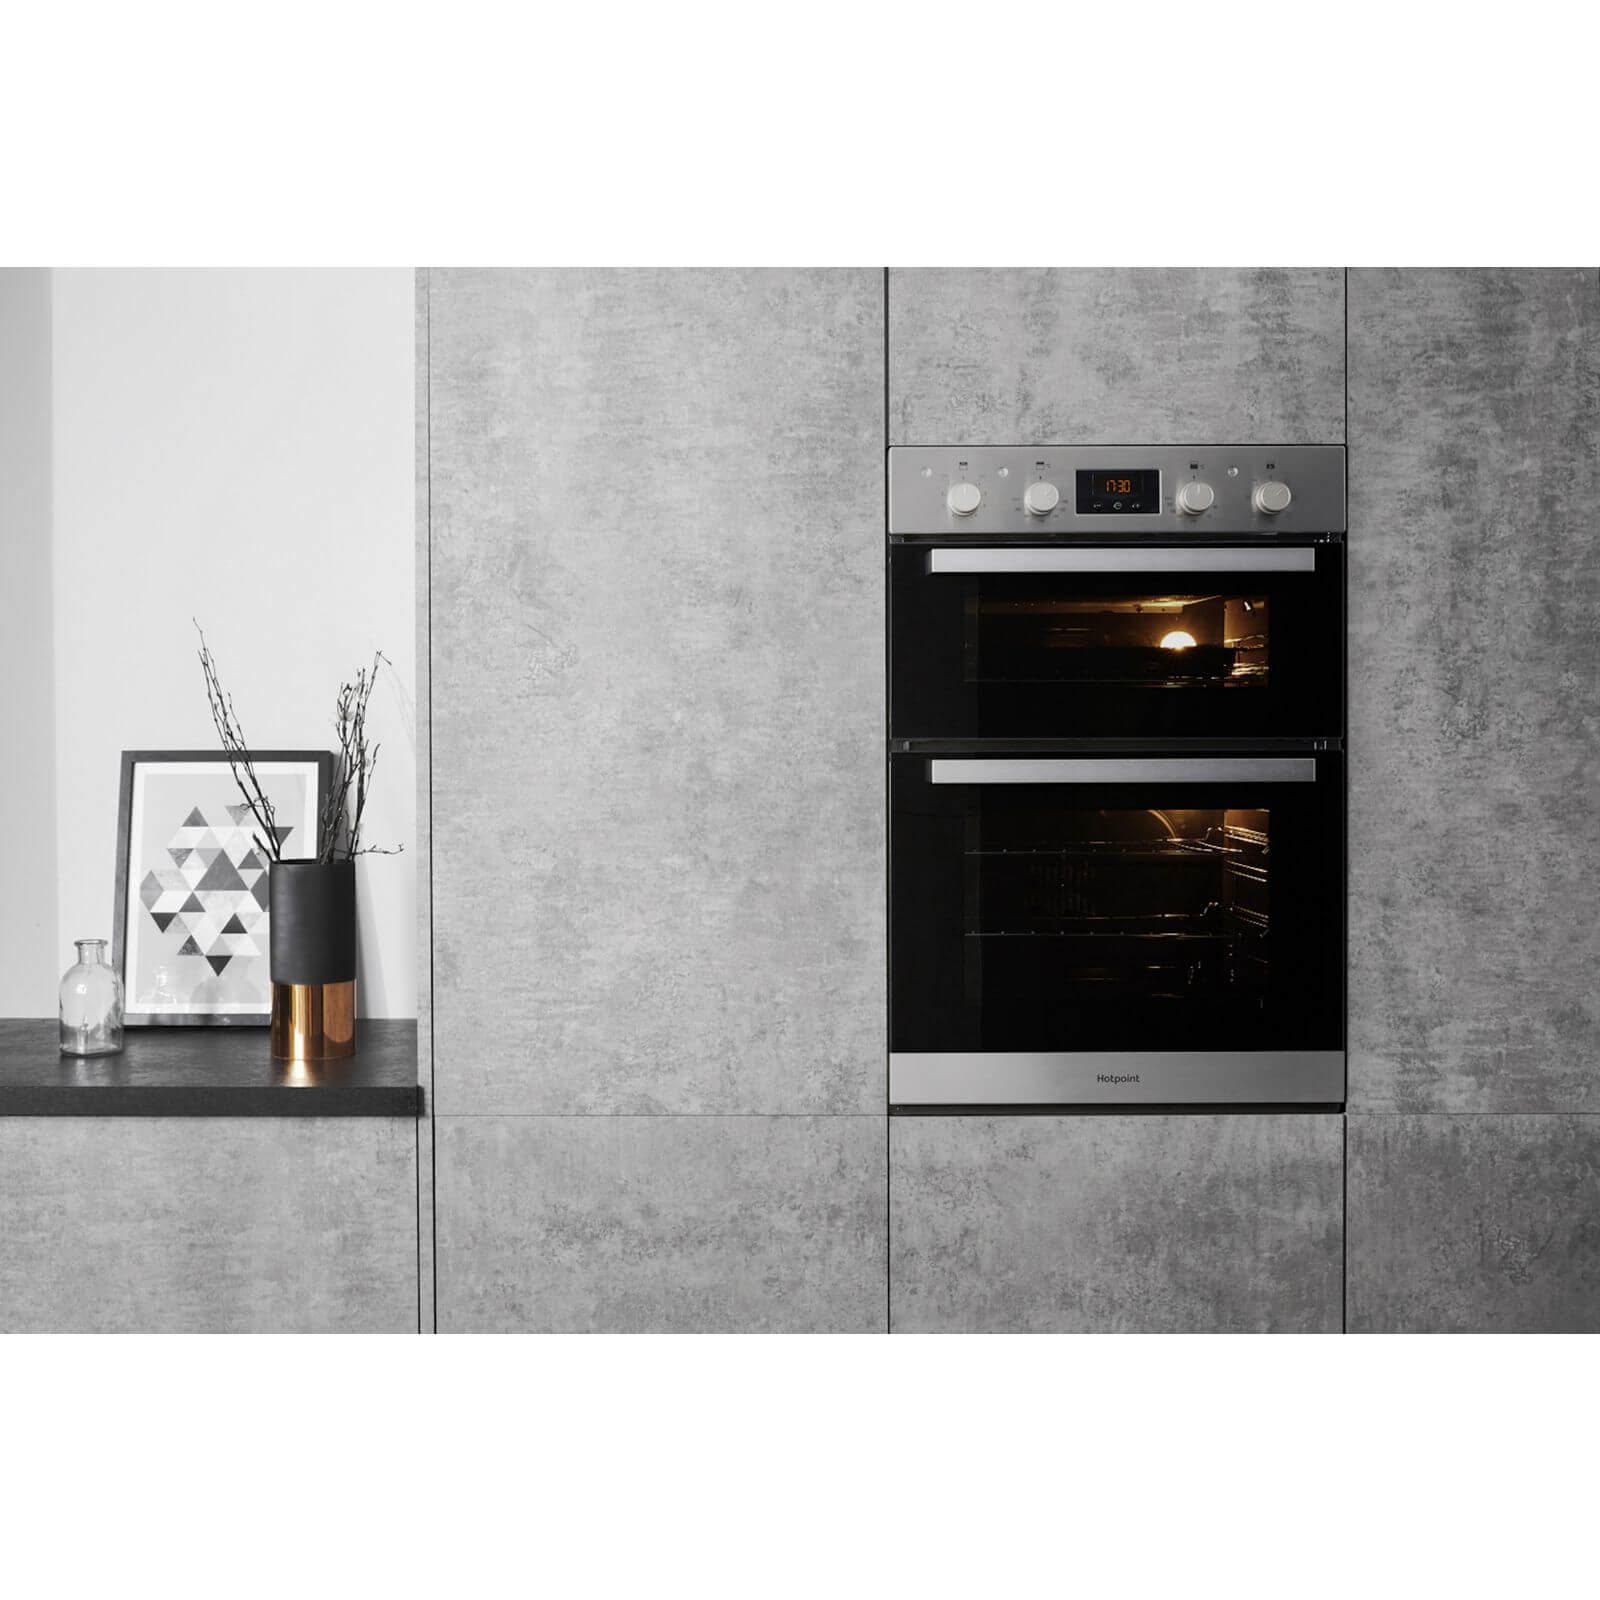 Hotpoint Class 3 DKD3 841 IX Built-in Double Electric Oven - Stainless Steel